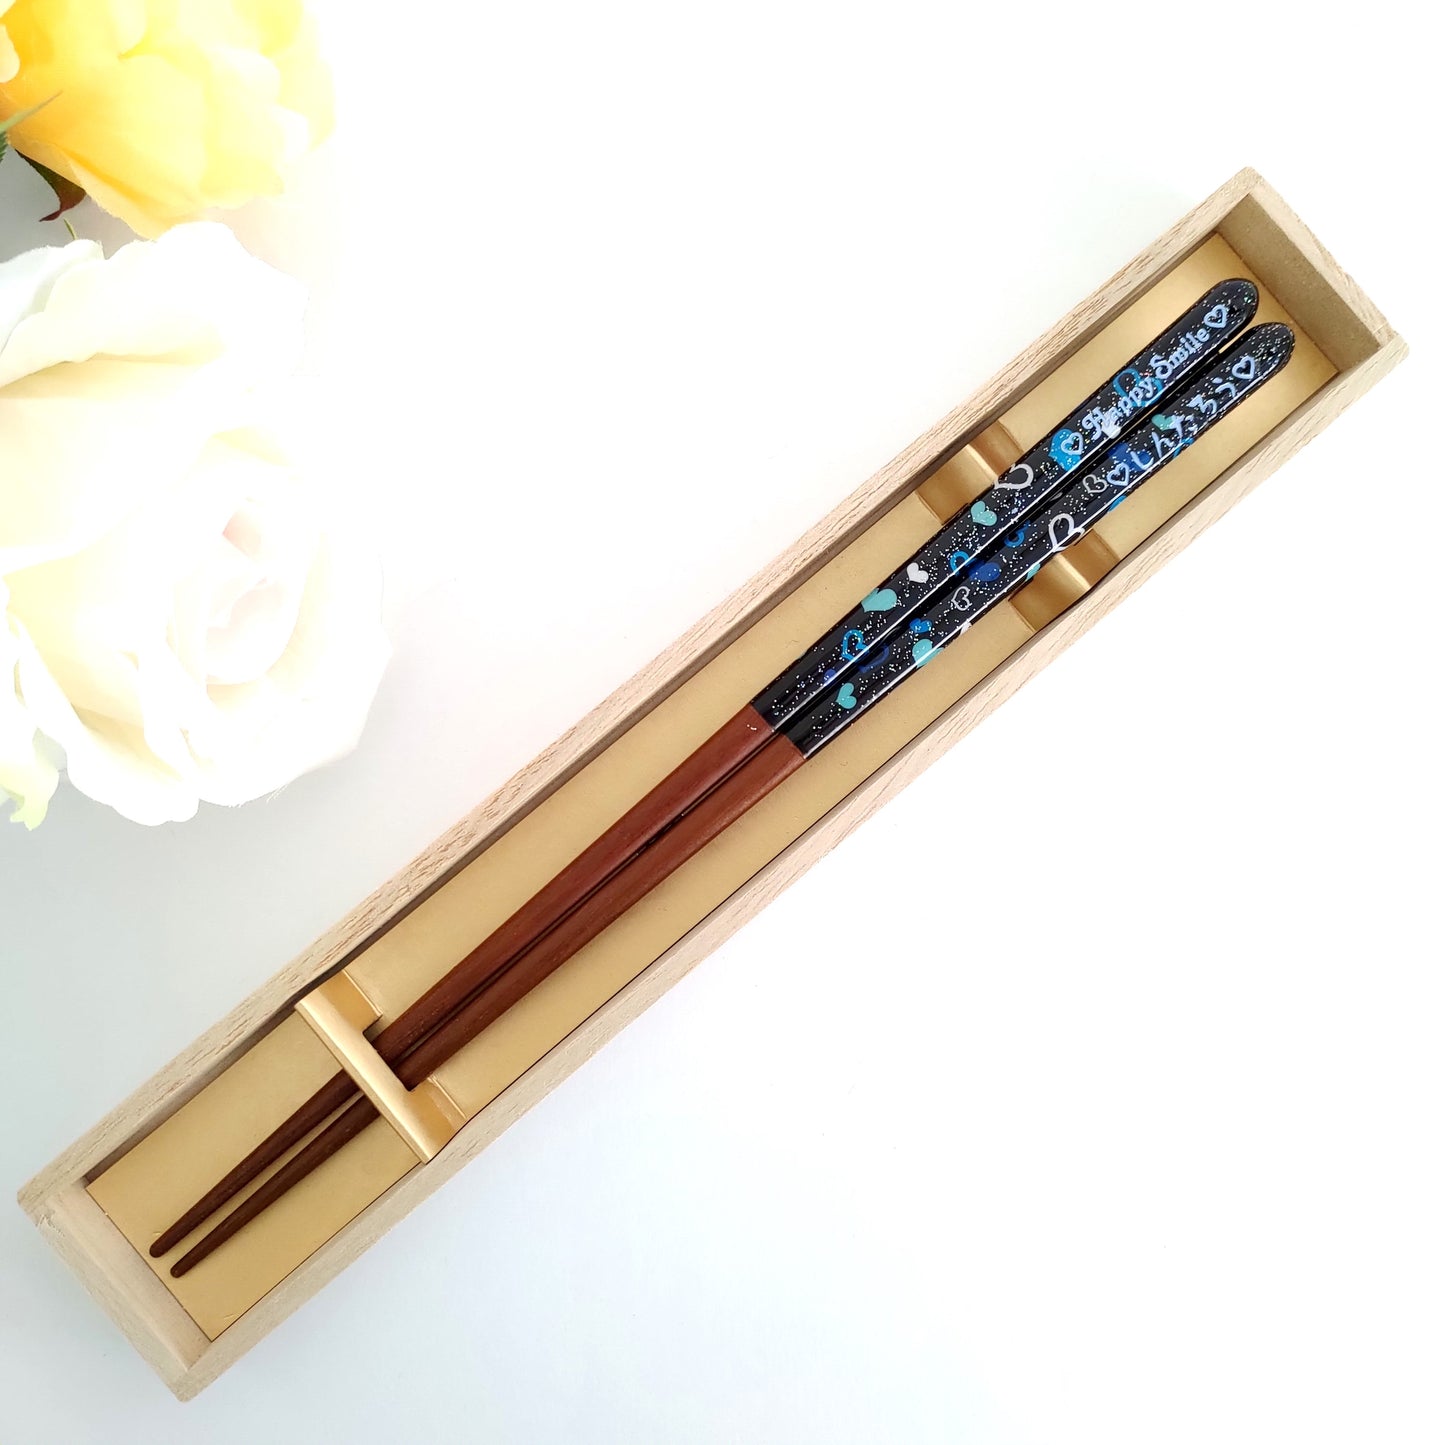 Cute Japanese chopsticks with shiny heart design blue pink - SINGLE PAIR WITH ENGRAVED WOODEN BOX SET